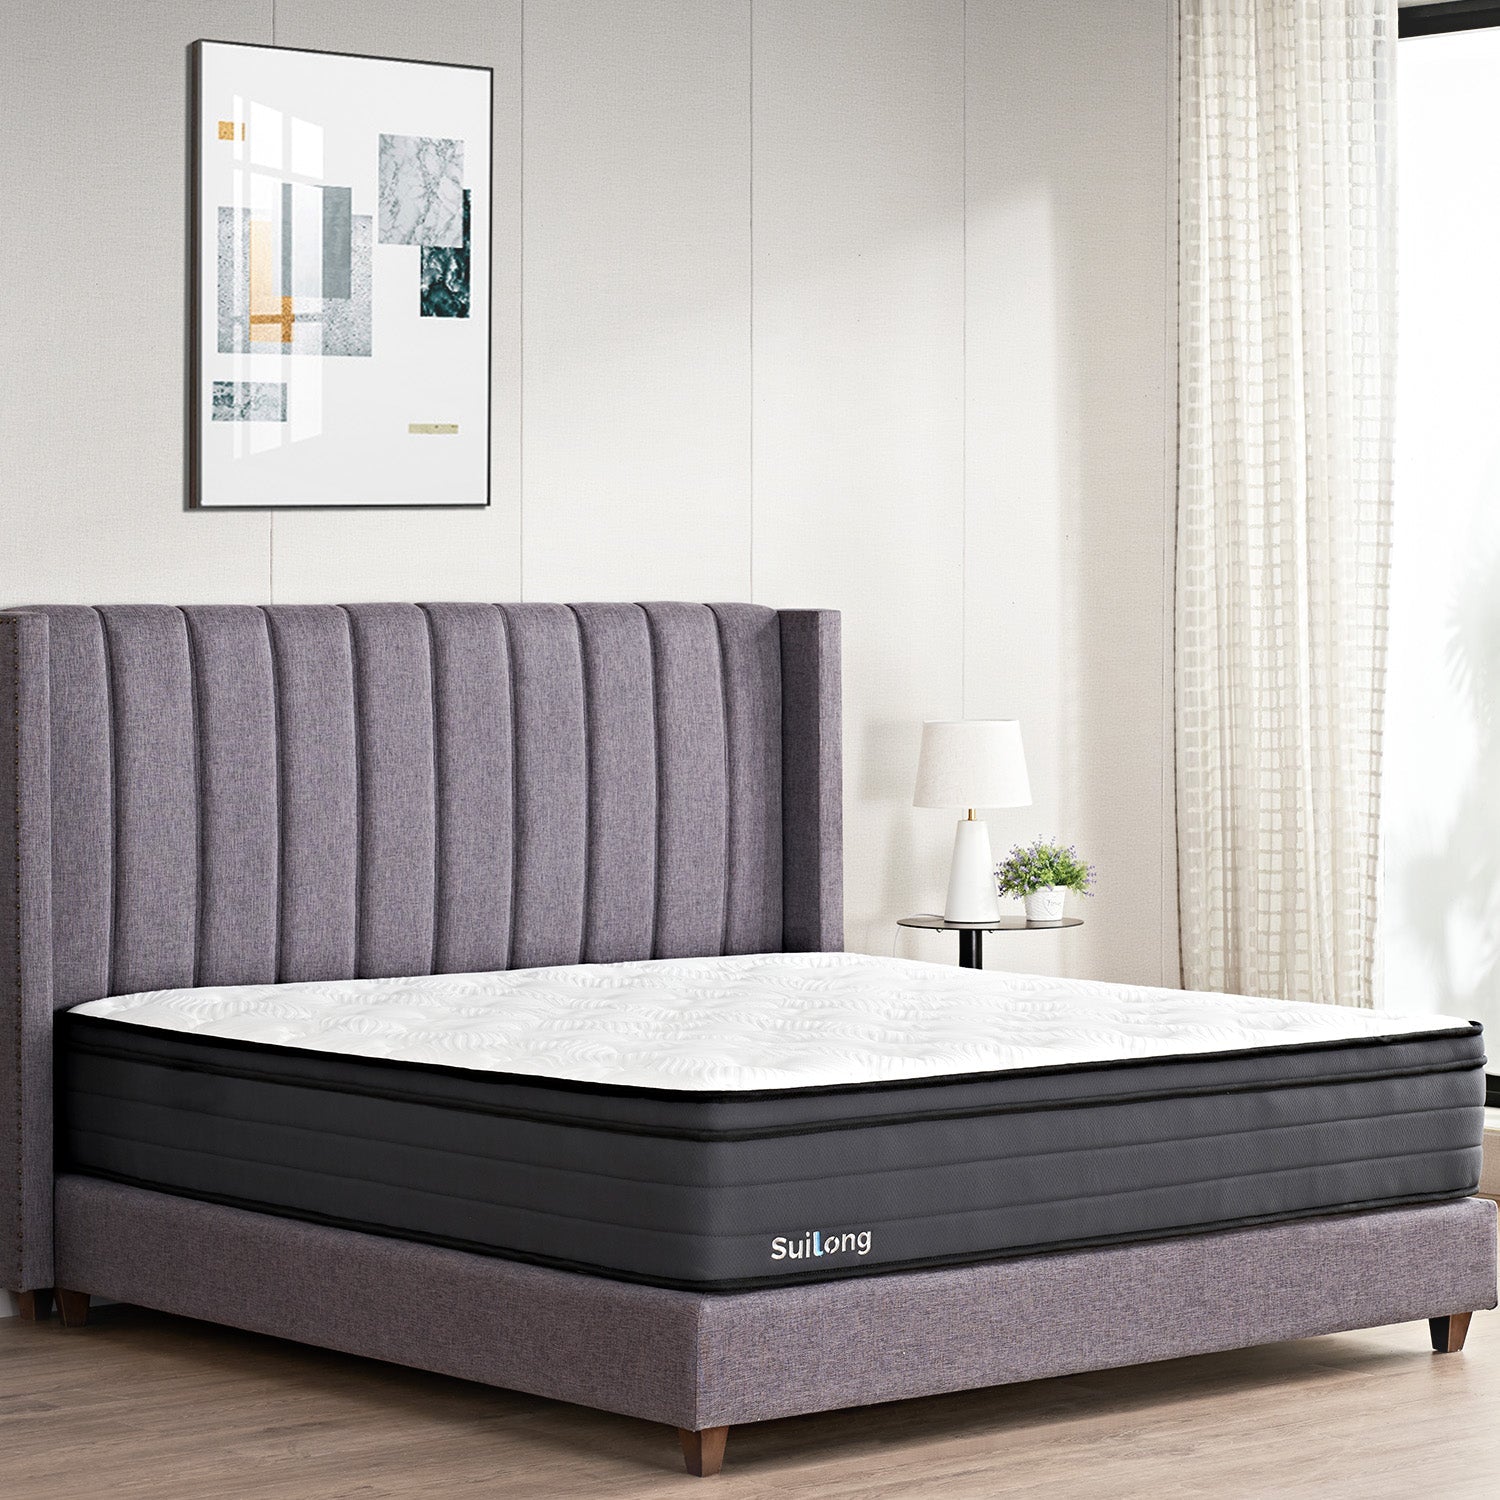 Suilong Utopia 30cm Gel Memory Foam And Pocket Innerspring Hybrid Mattress - The only Memory Foam Mattress you will ever need!